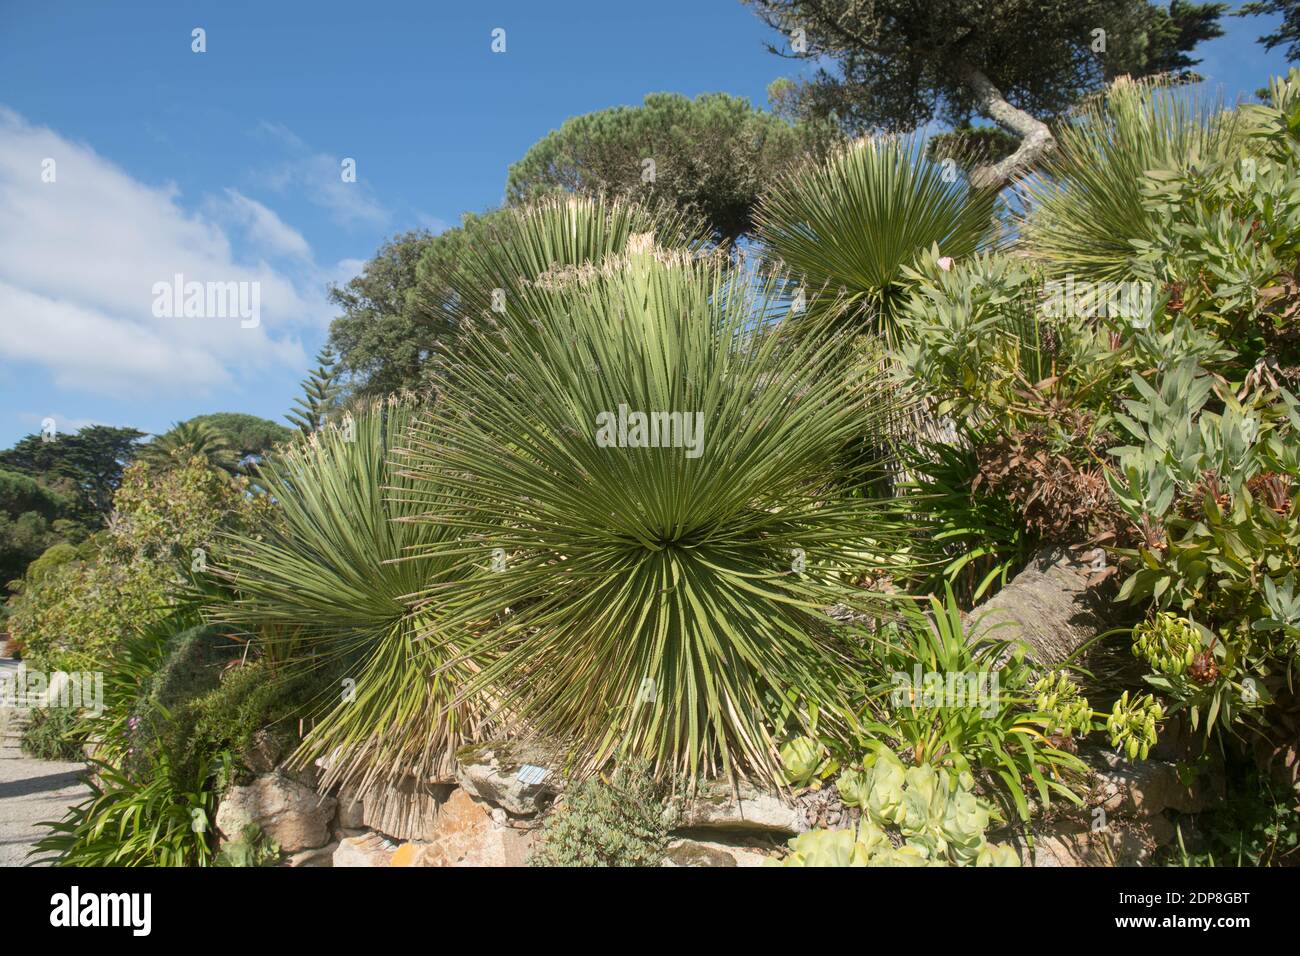 Evergreen Foliage of a Succulent Great Desert Spoon or Green Sotol Plant (Dasylirion acrotichum) Growing in a Tropical Garden on the Island of Tresco Stock Photo